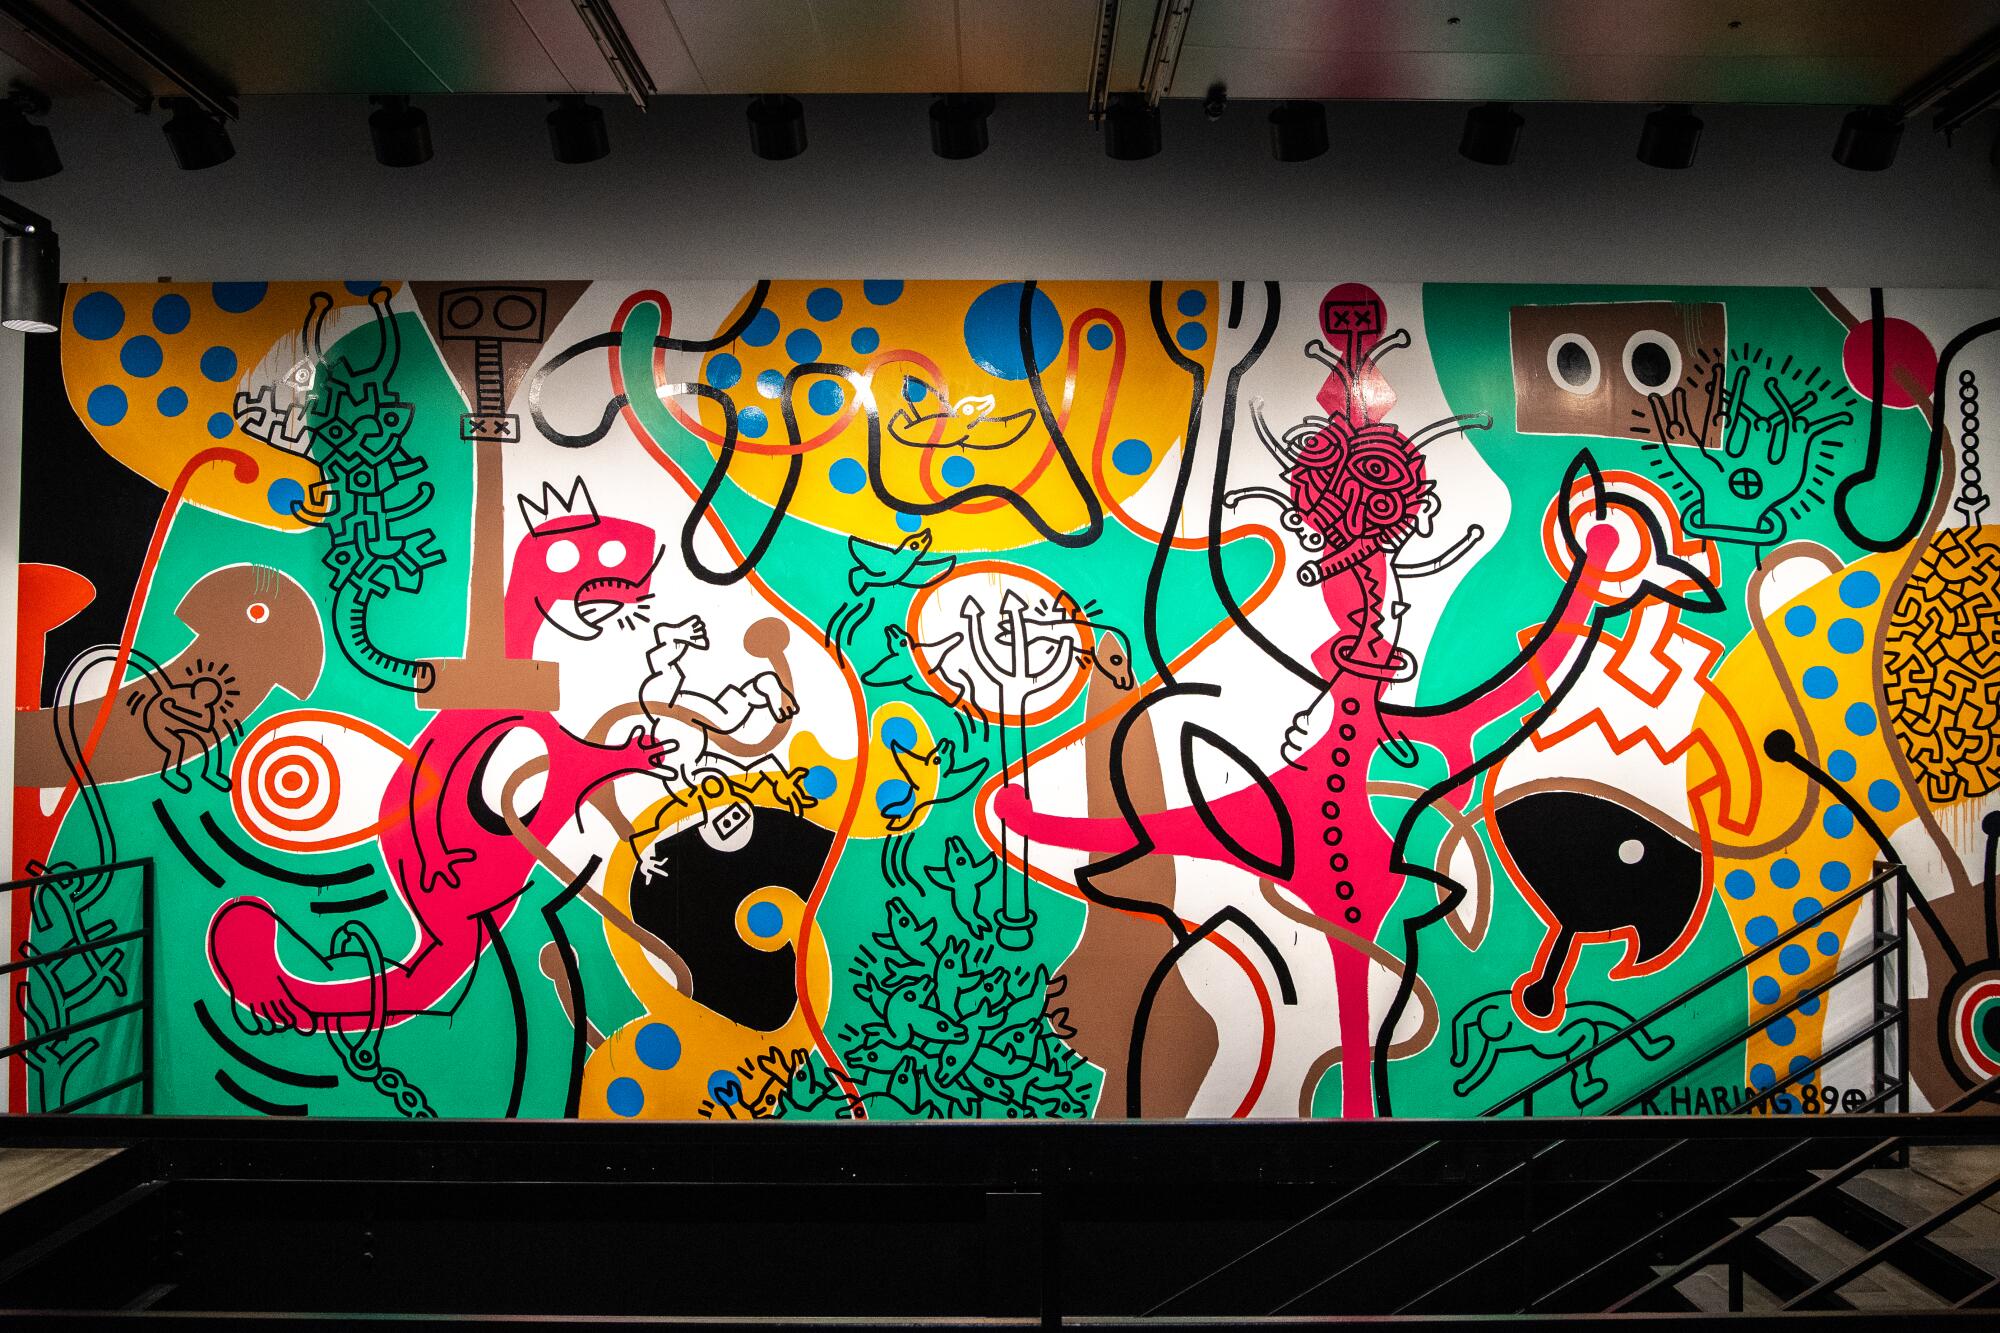 Keith Haring's L.A. mural.